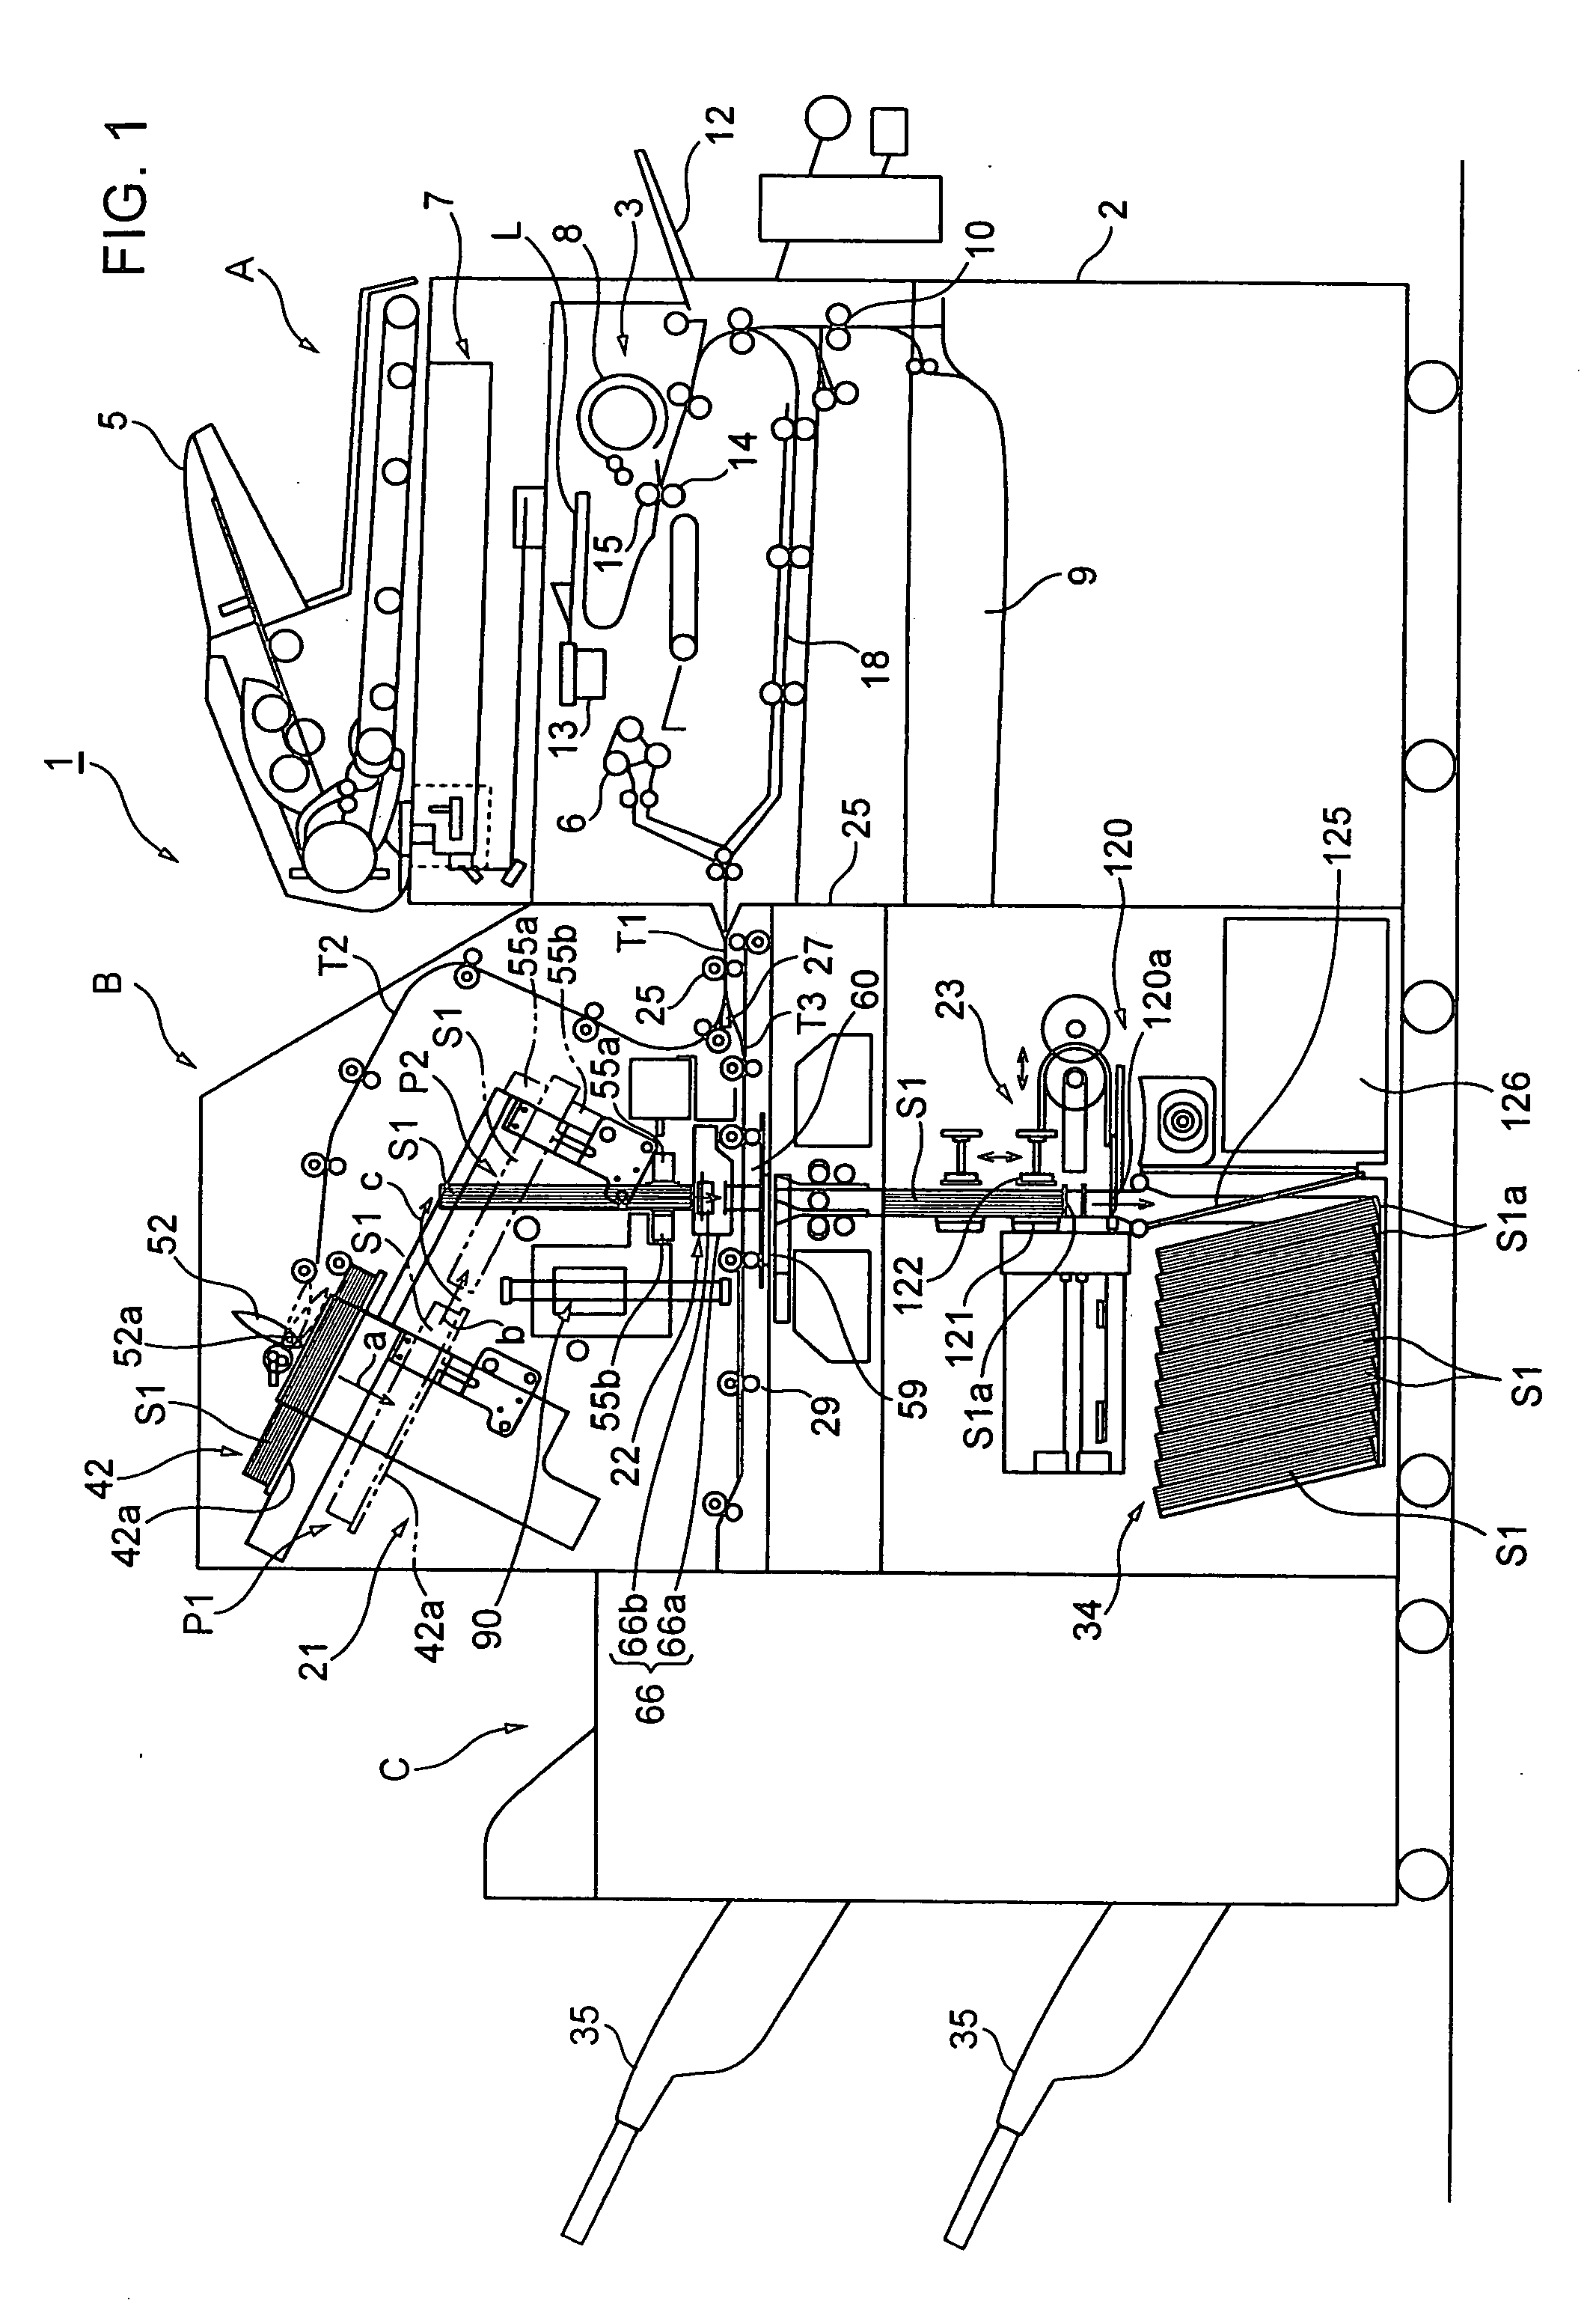 Image formation processing system